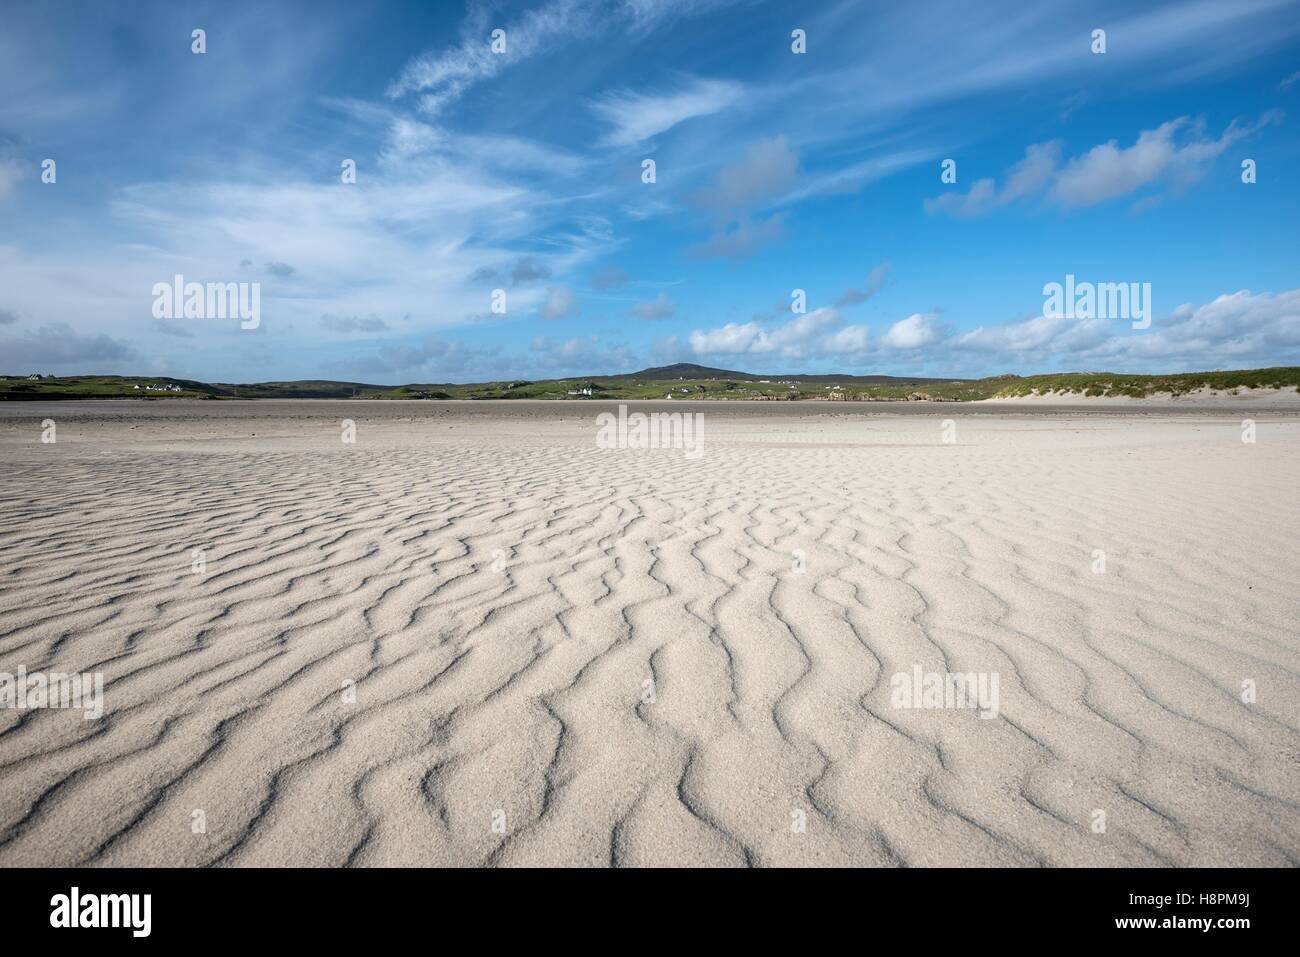 Wave pattern in the sand, Uig beach, Outer Hebrides, Isle of Harris, Scotland, United Kingdom Stock Photo